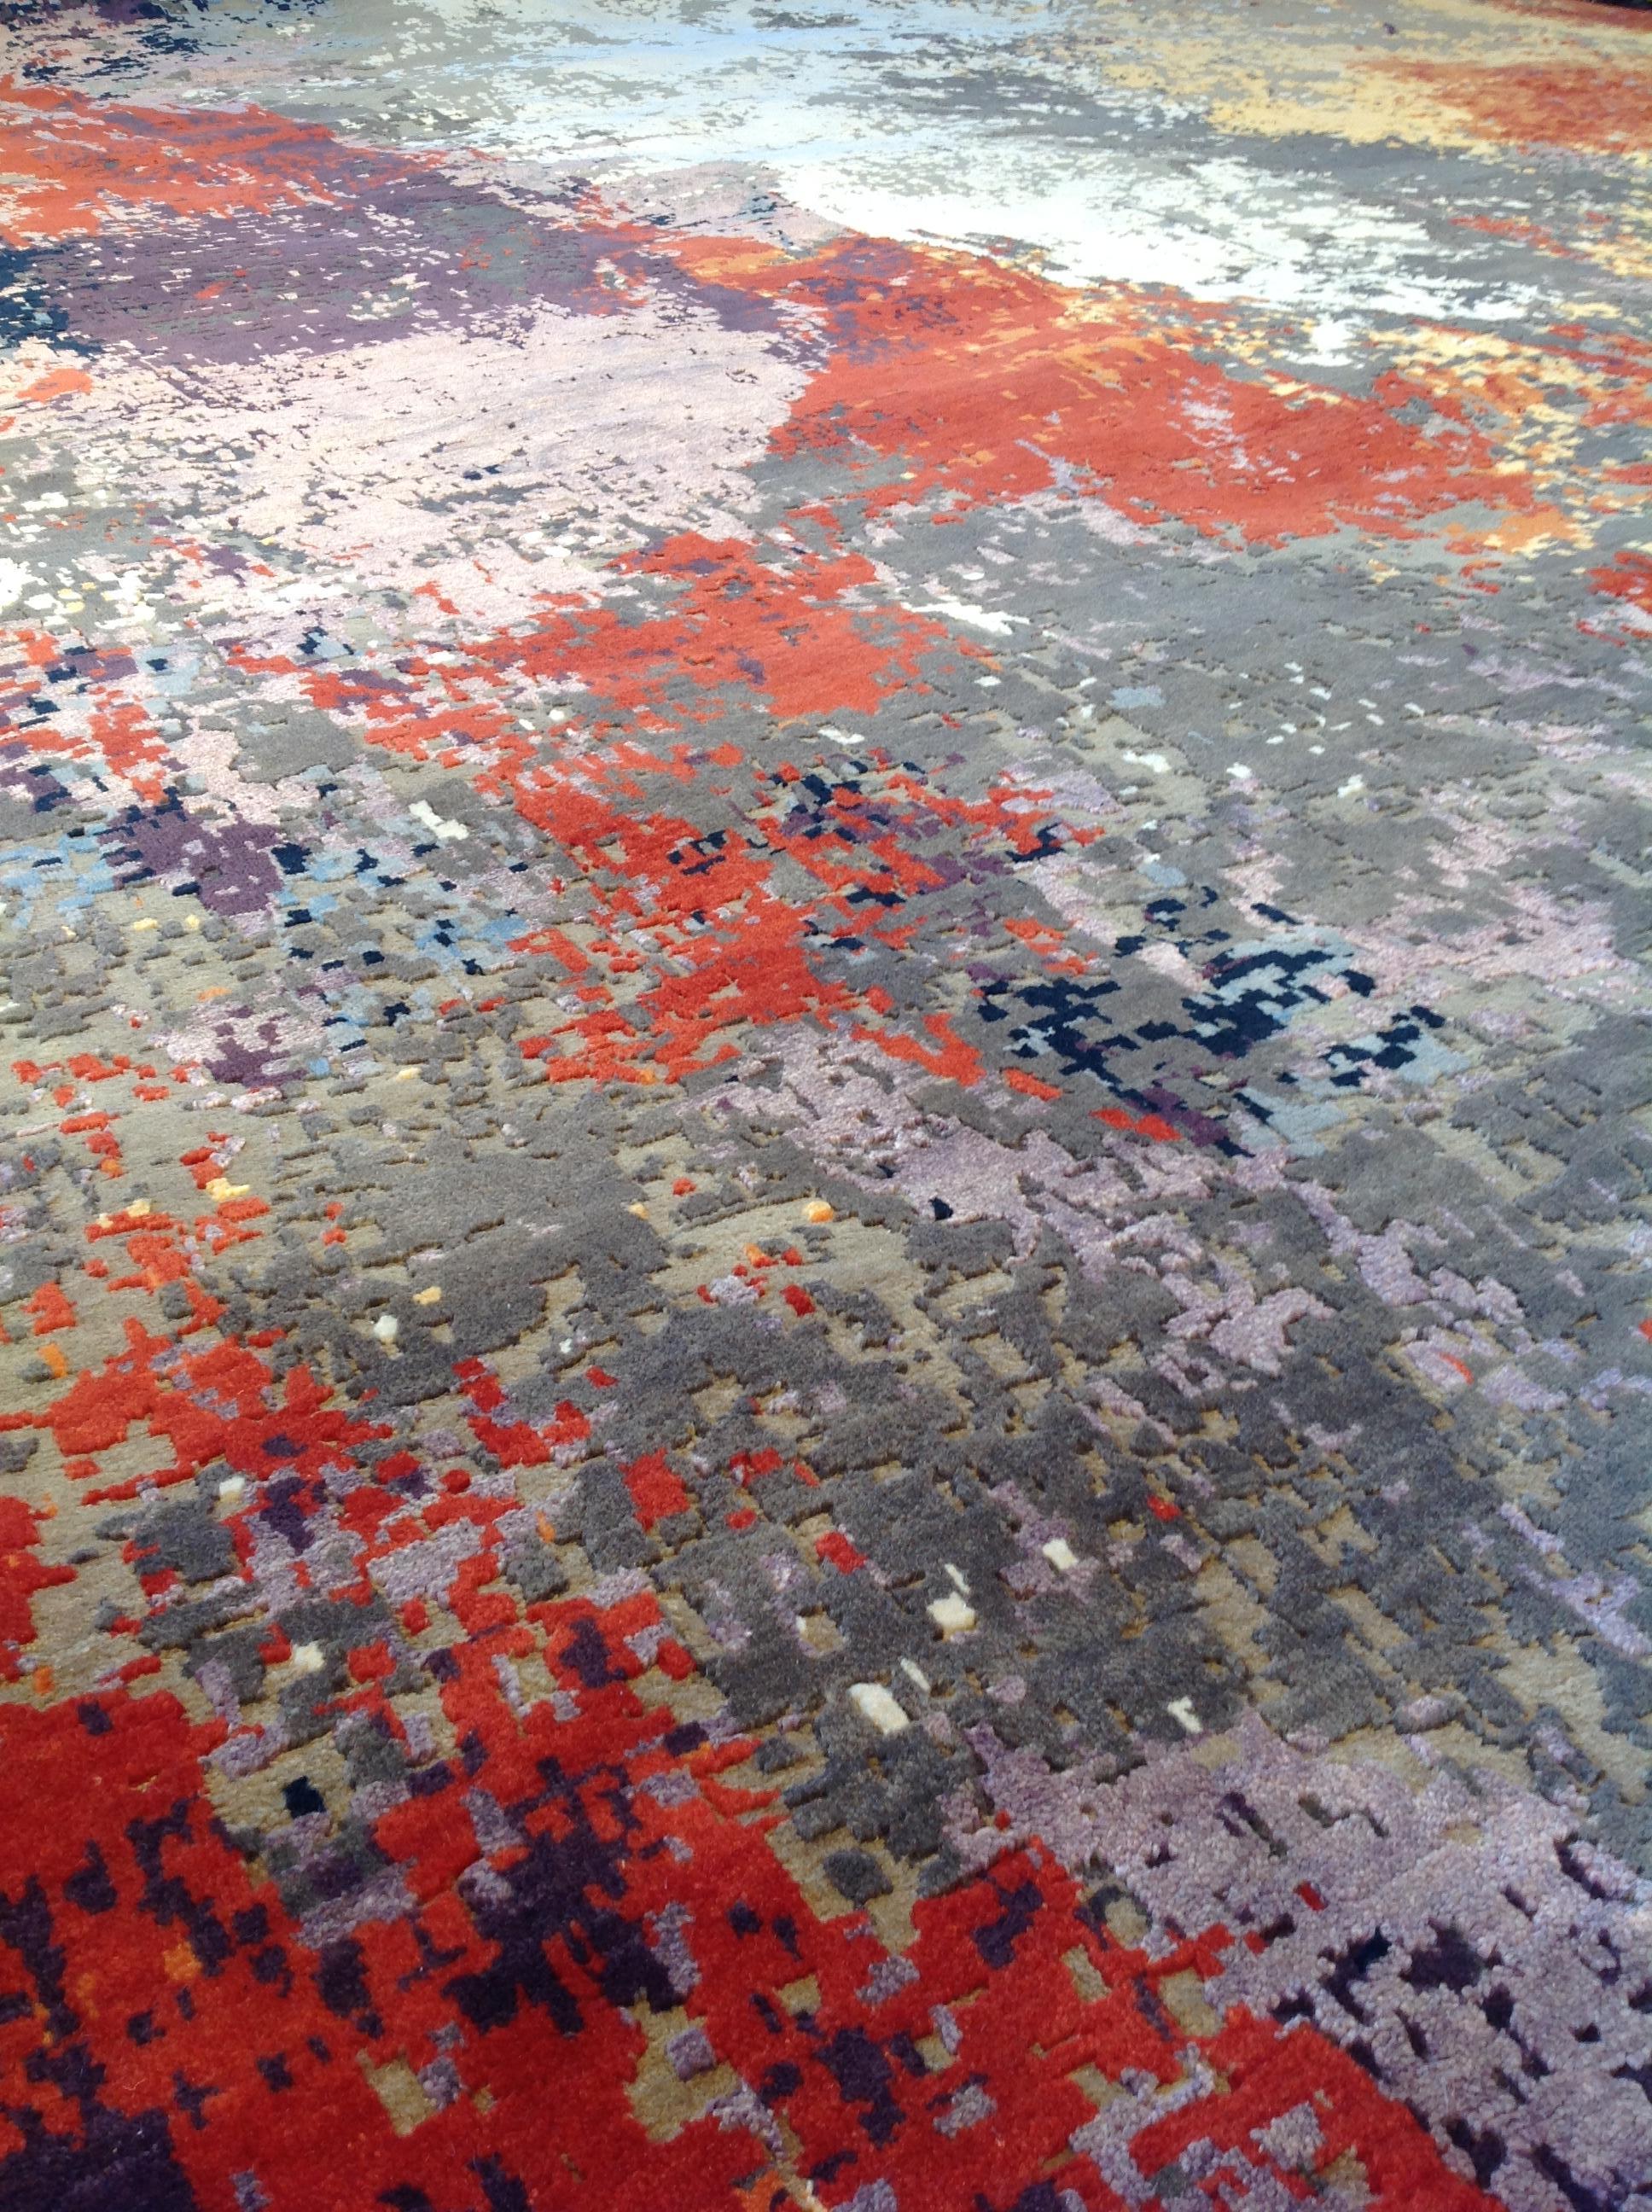 Contemporary abstract rug
Fun and modern look for this contemporary abstract rug. A combination of contrasting colors on a high low texture. Very durable and soft to the touch, this piece will add spark to your space. 
Hand-knotted in India.